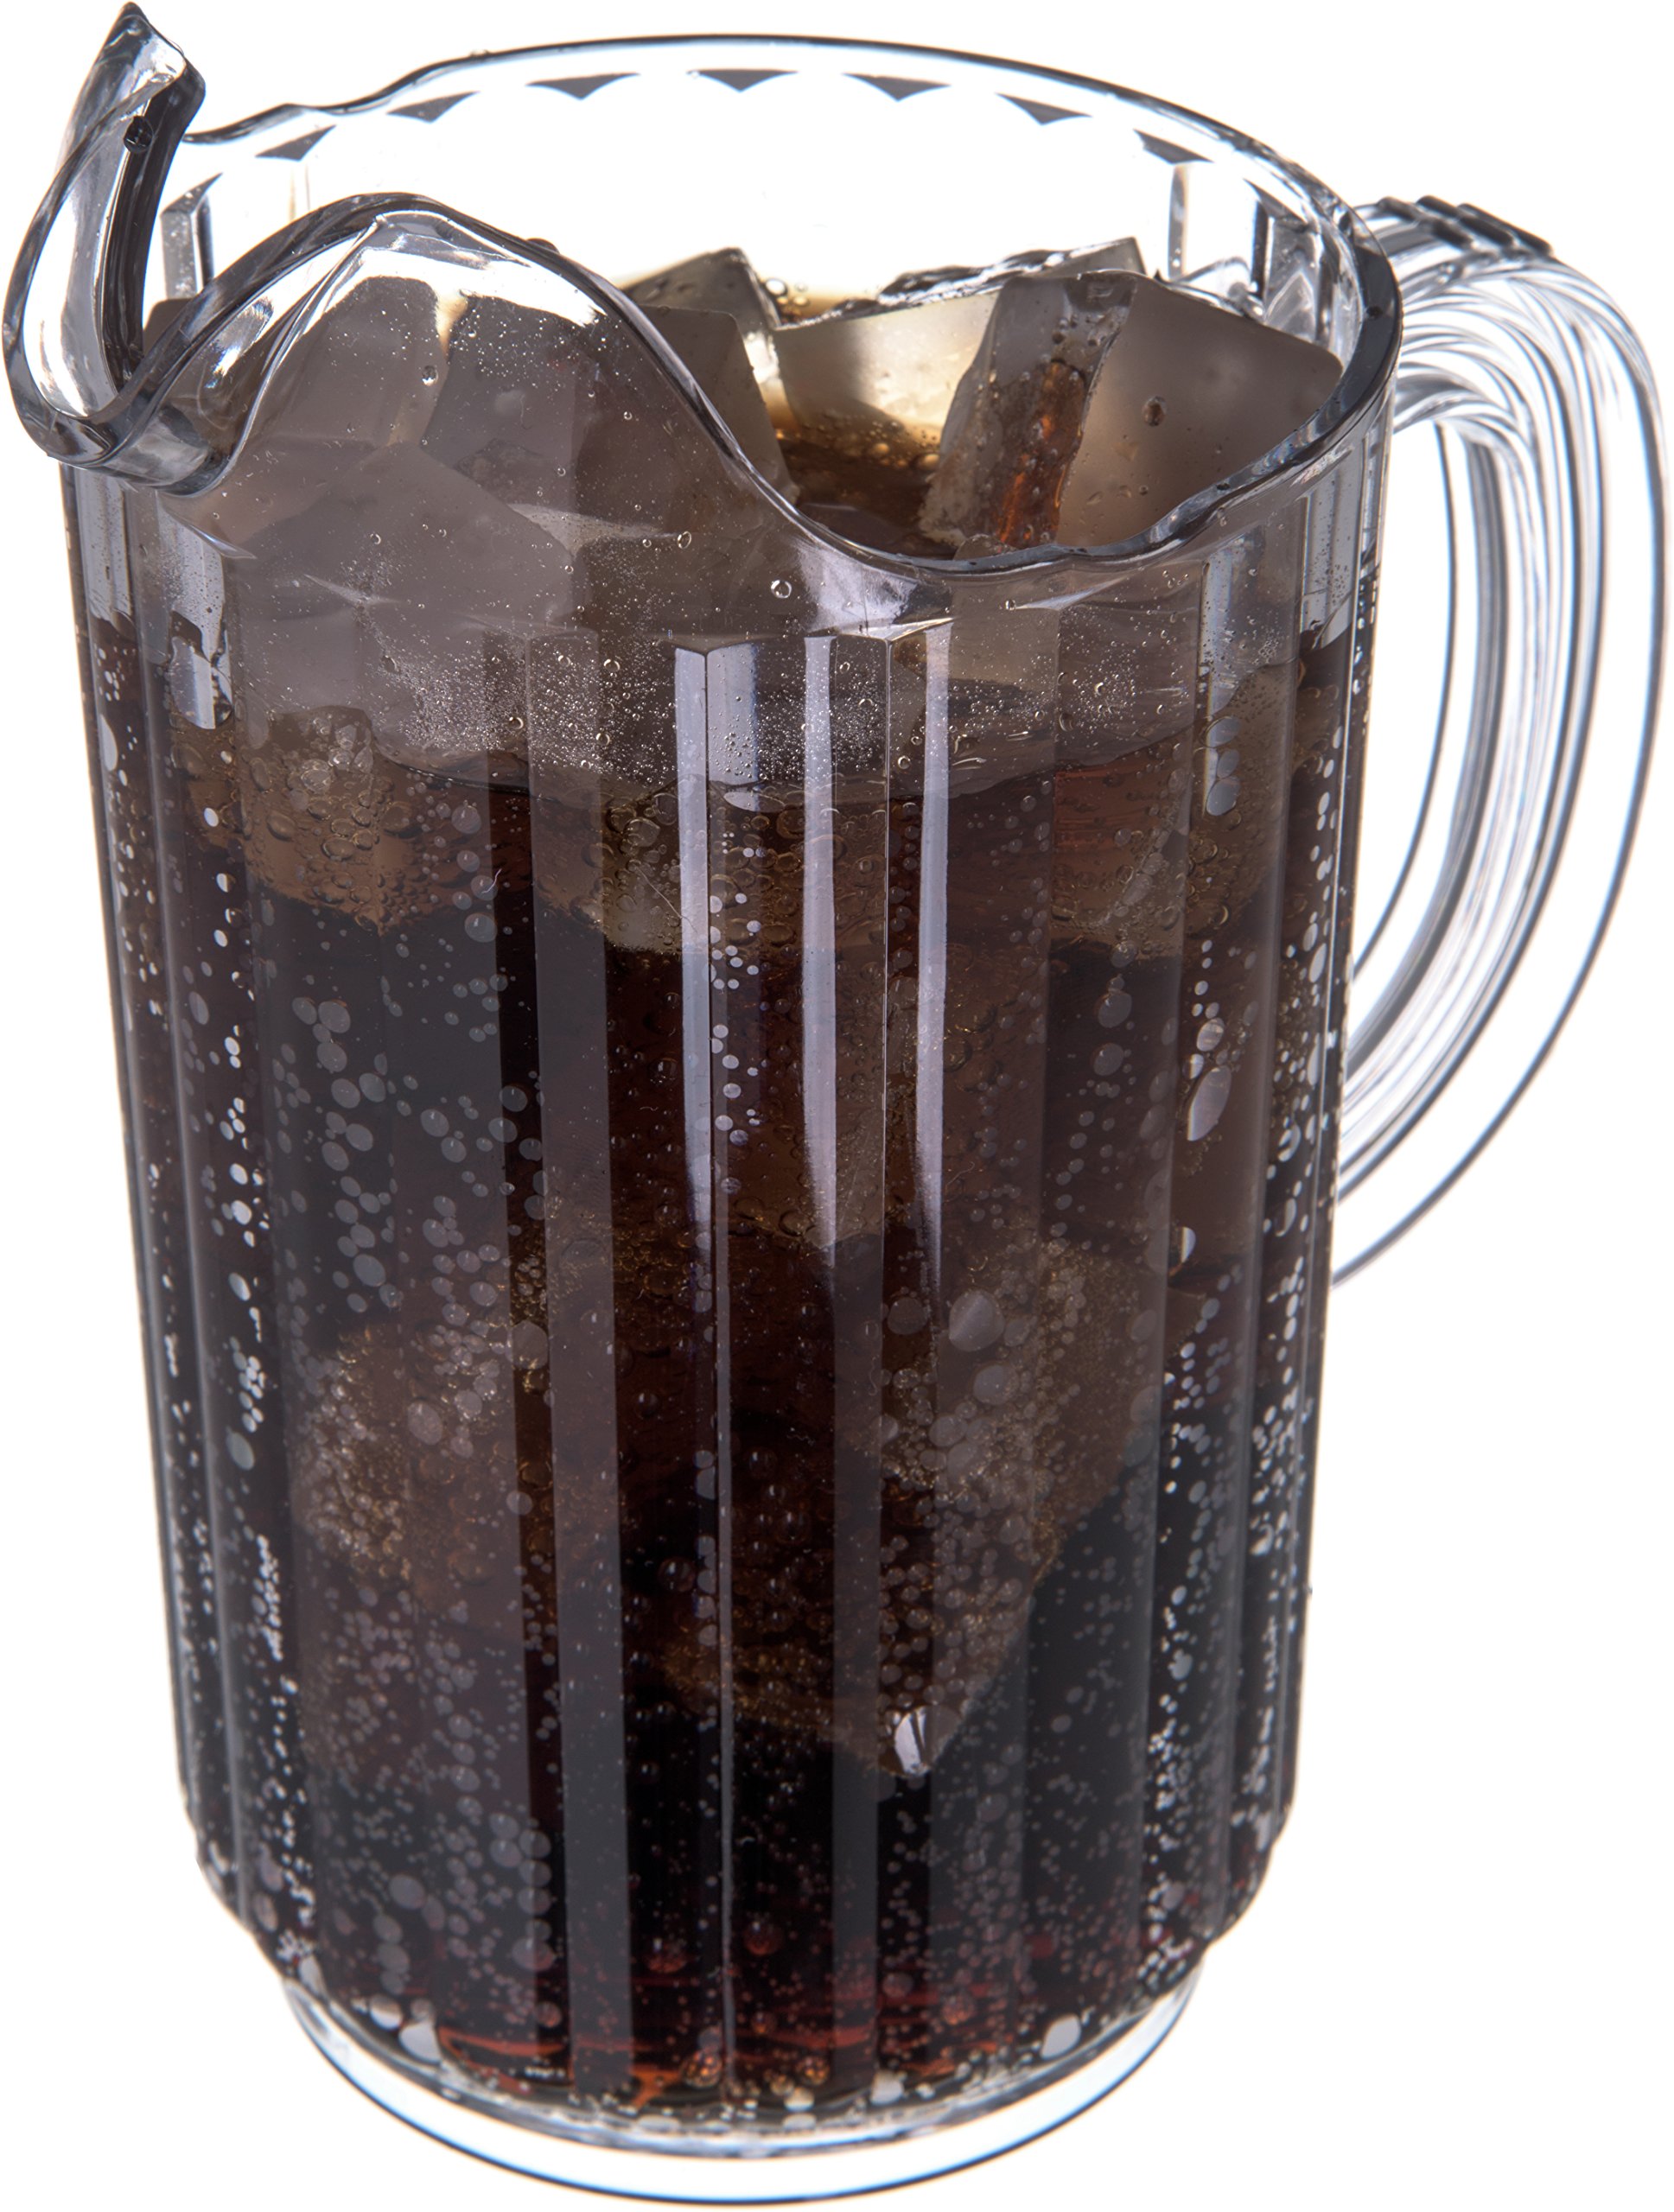 Carlisle FoodService Products Clear Pitcher Tall Pitcher, Plastic Pitcher for Restaurants, Catering, Kitchens, Plastic, 32 Ounces, Clear